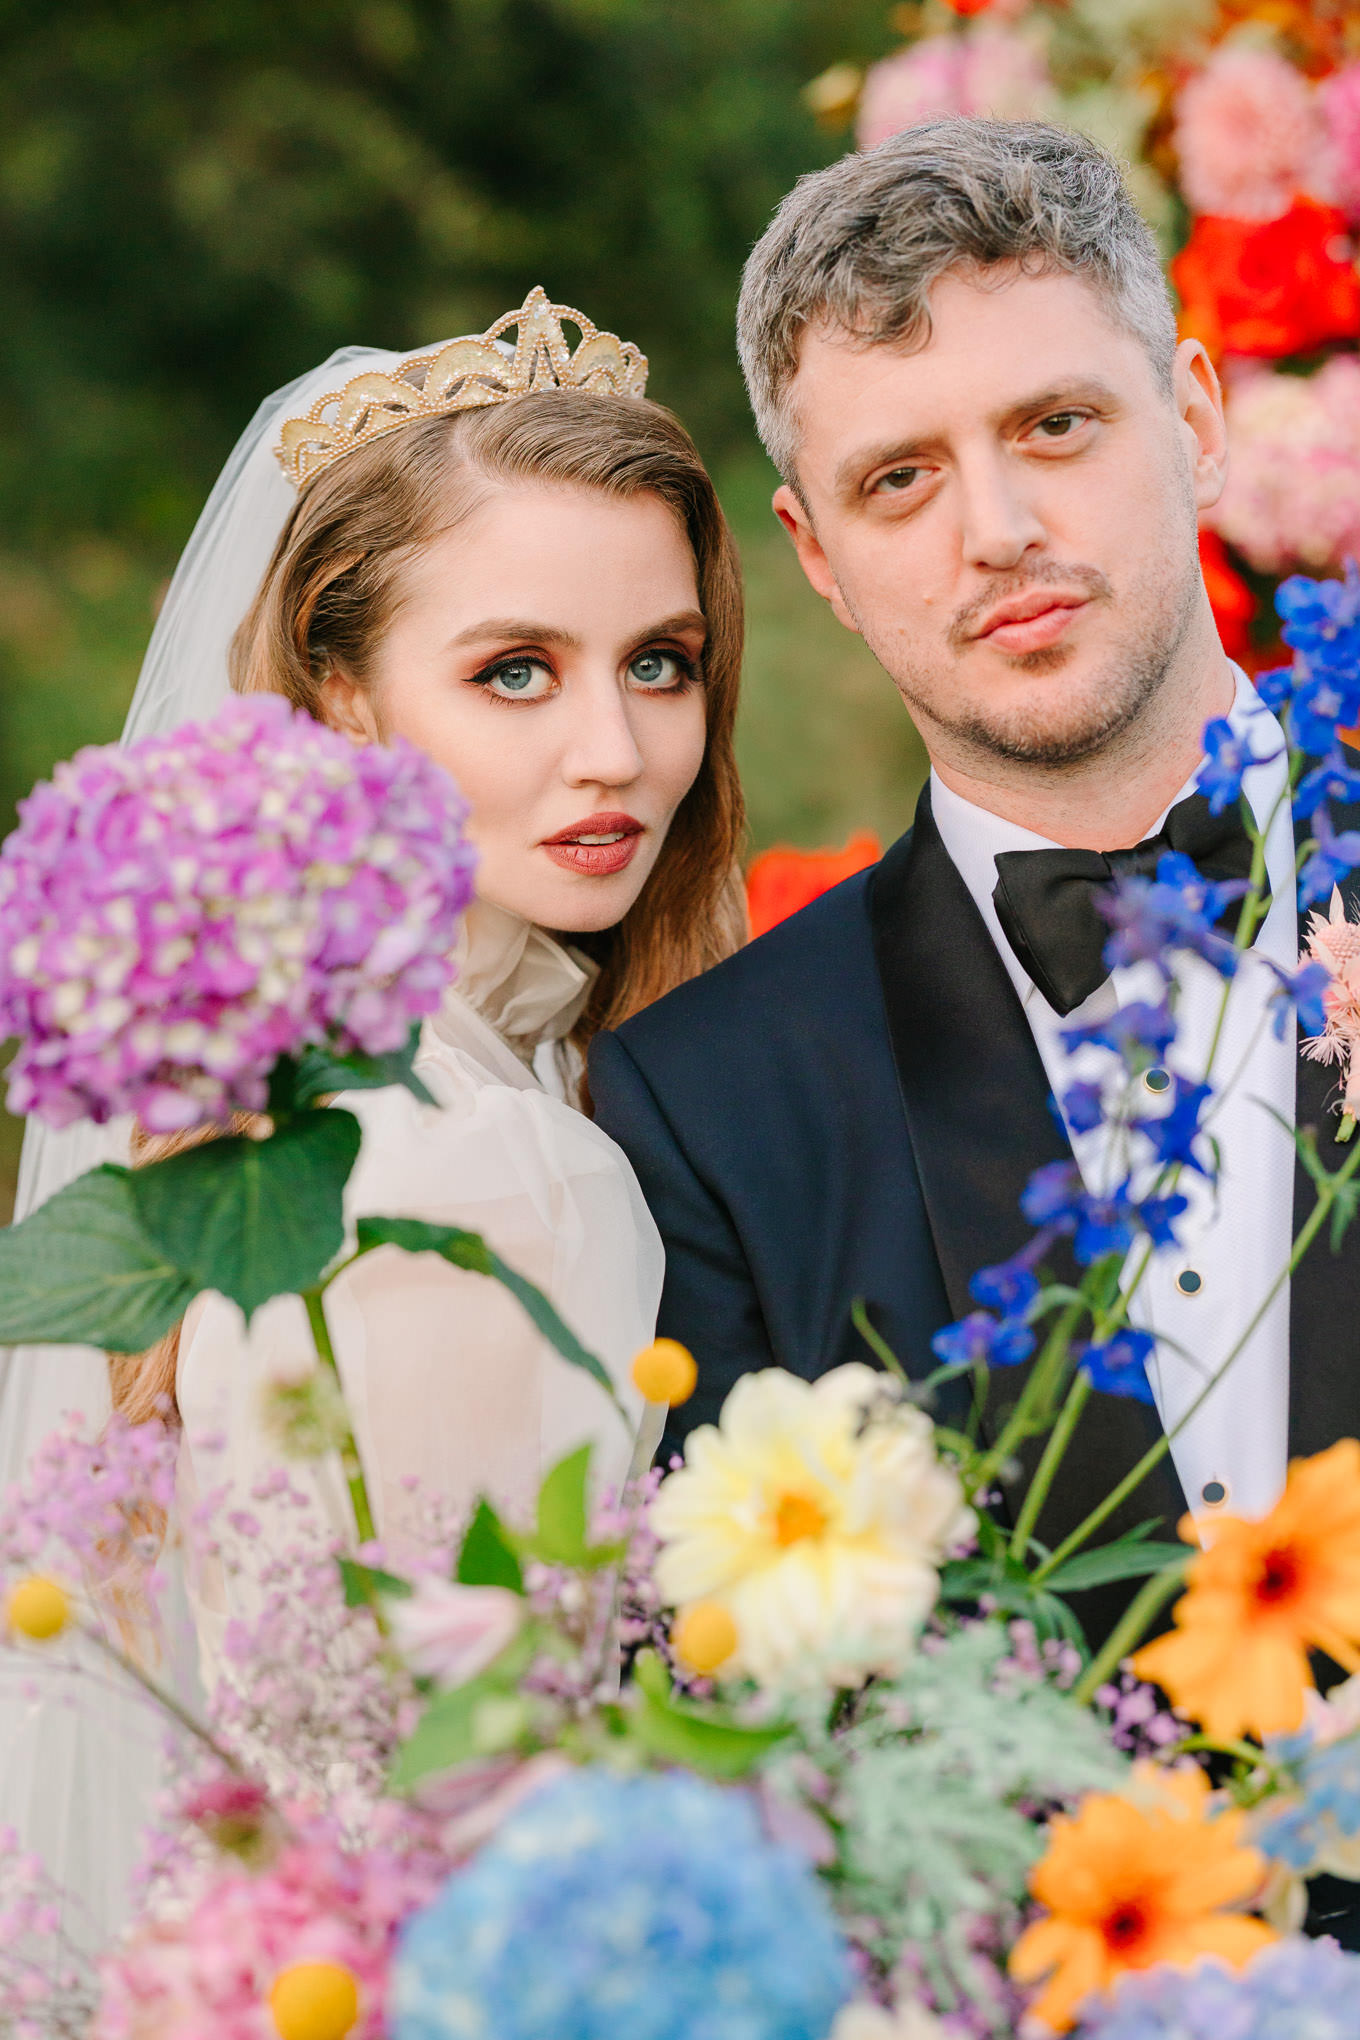 Allison Harvard & Jeremy Burke portraits at floral wedding ceremony installation | Colorful and quirky wedding at Higuera Ranch in San Luis Obispo | #sanluisobispowedding #californiawedding #higueraranch #madonnainn   

Source: Mary Costa Photography | Los Angeles
Source: Mary Costa Photography | Los Angeles